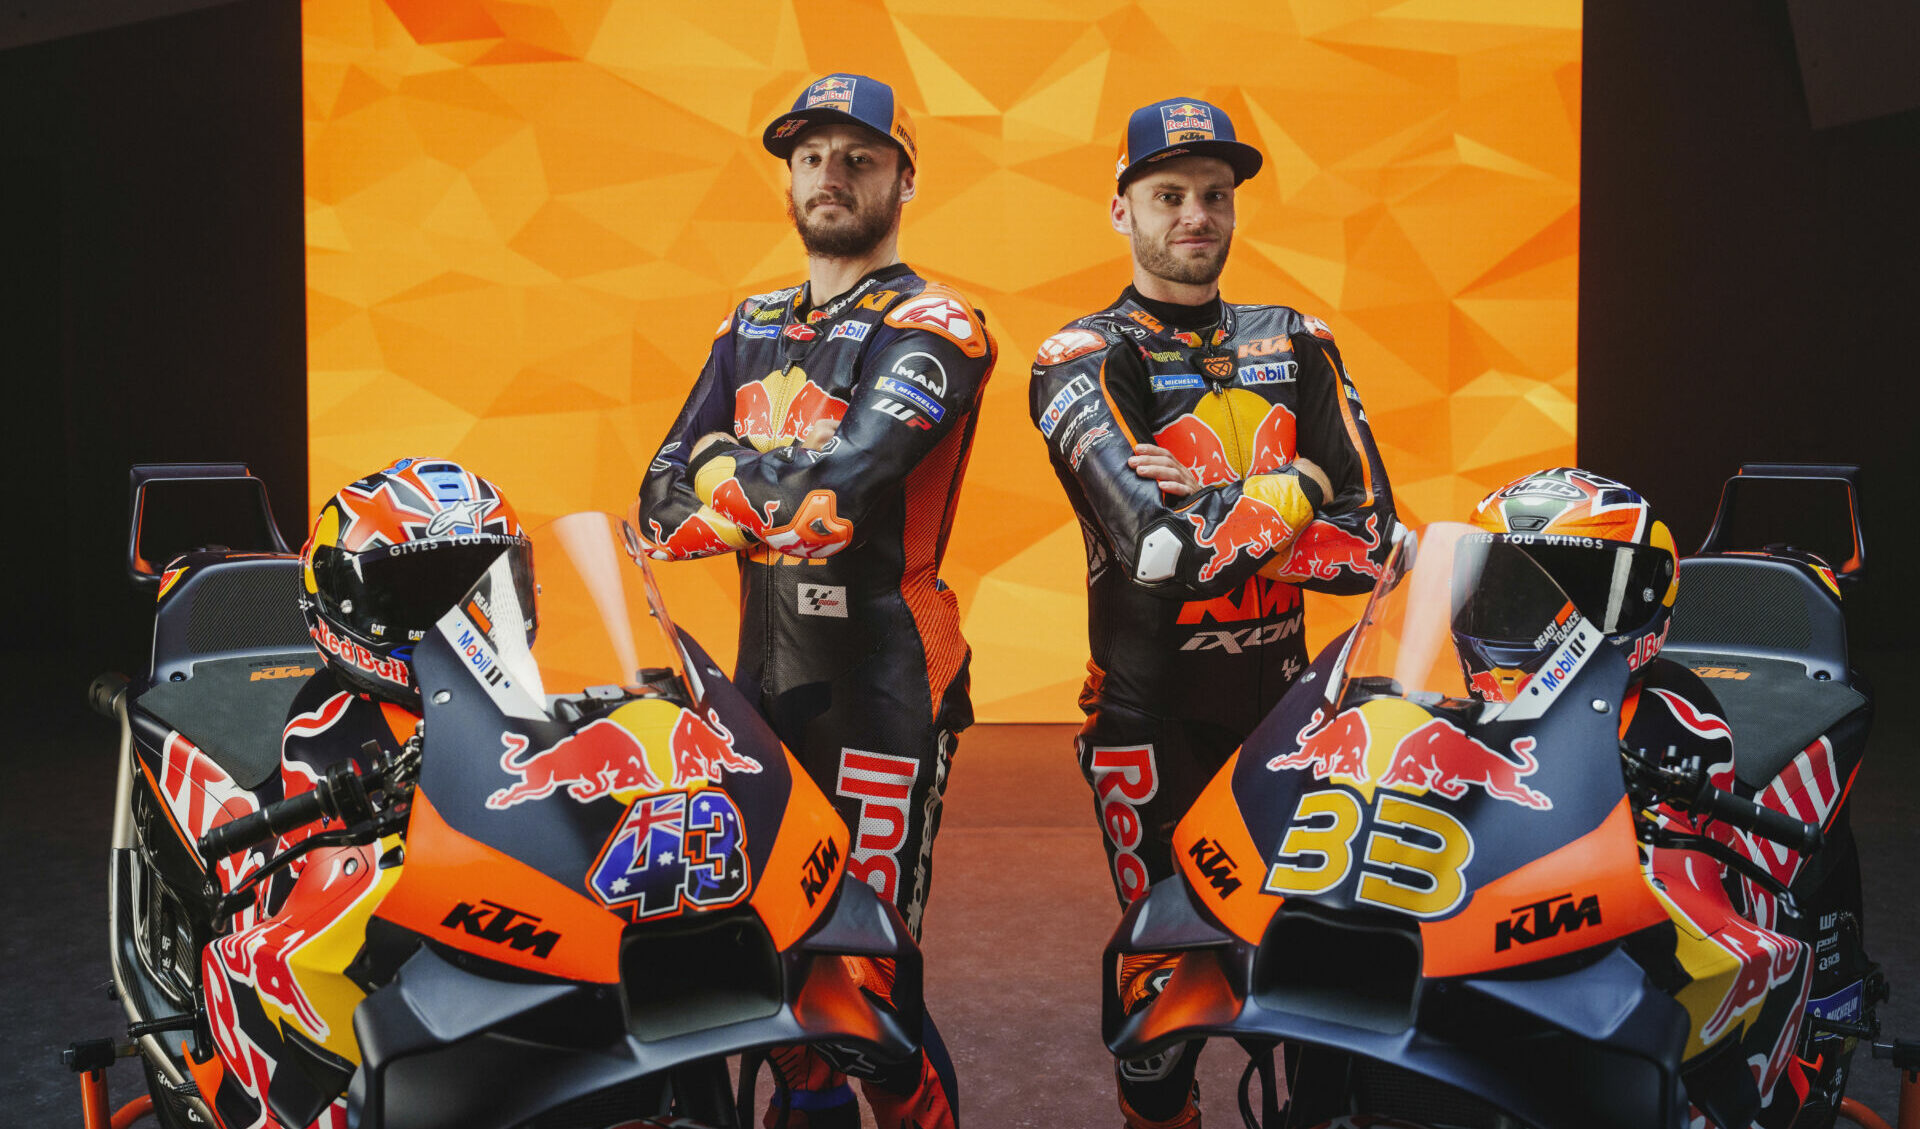 Jack Miller (left) and Brad Binder (right). Photo by Philip Platzer, courtesy Red Bull KTM Factory Racing.